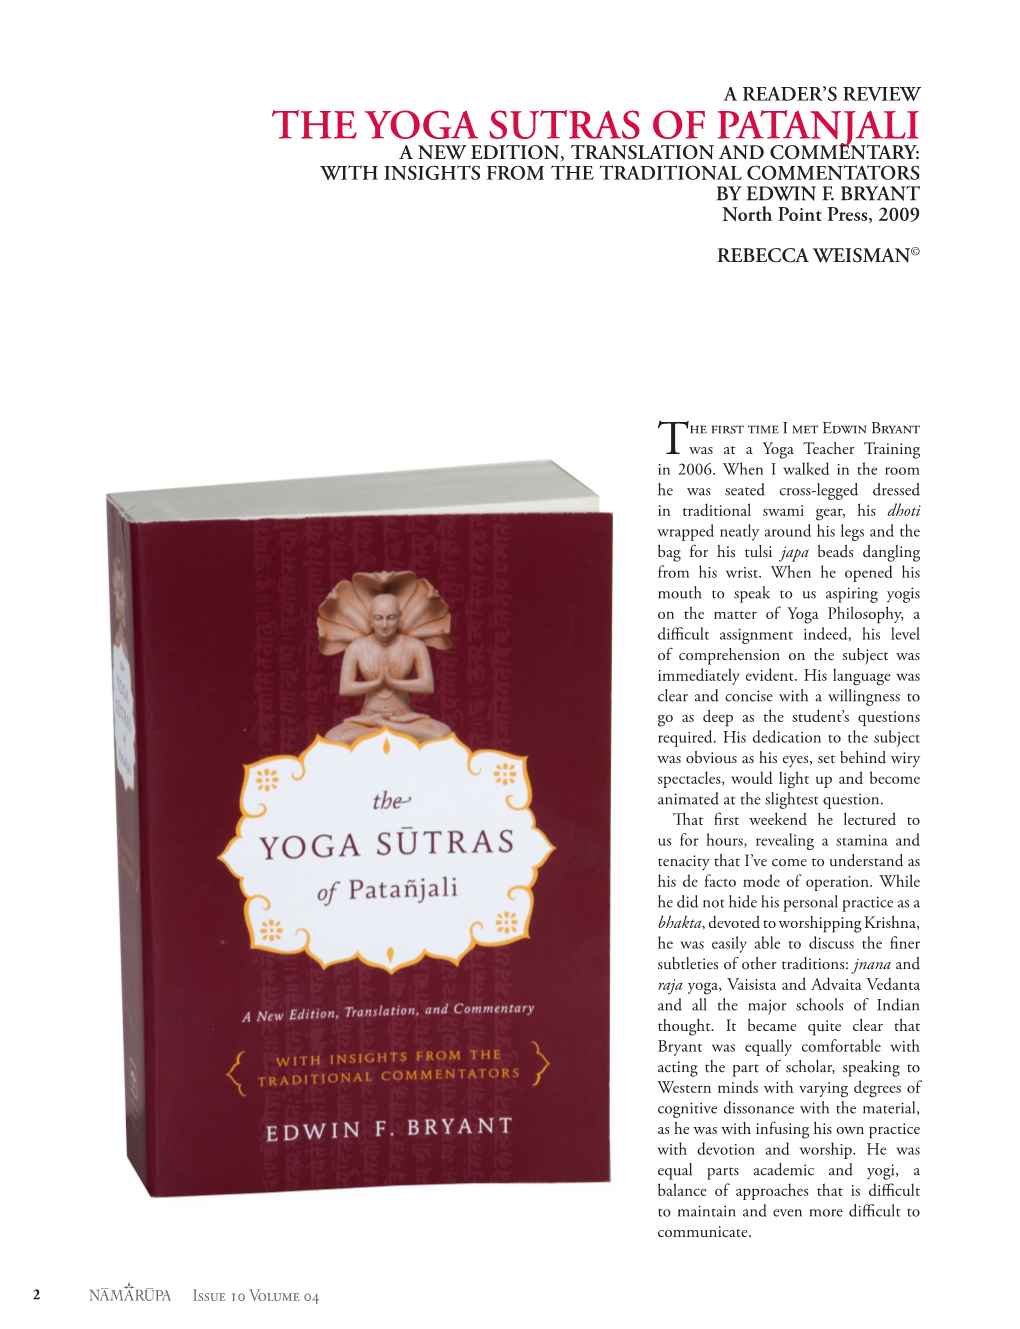 The Yoga Sutras of Patanjali a New Edition, Translation and Commentary: with Insights from the Traditional Commentators by Edwin F